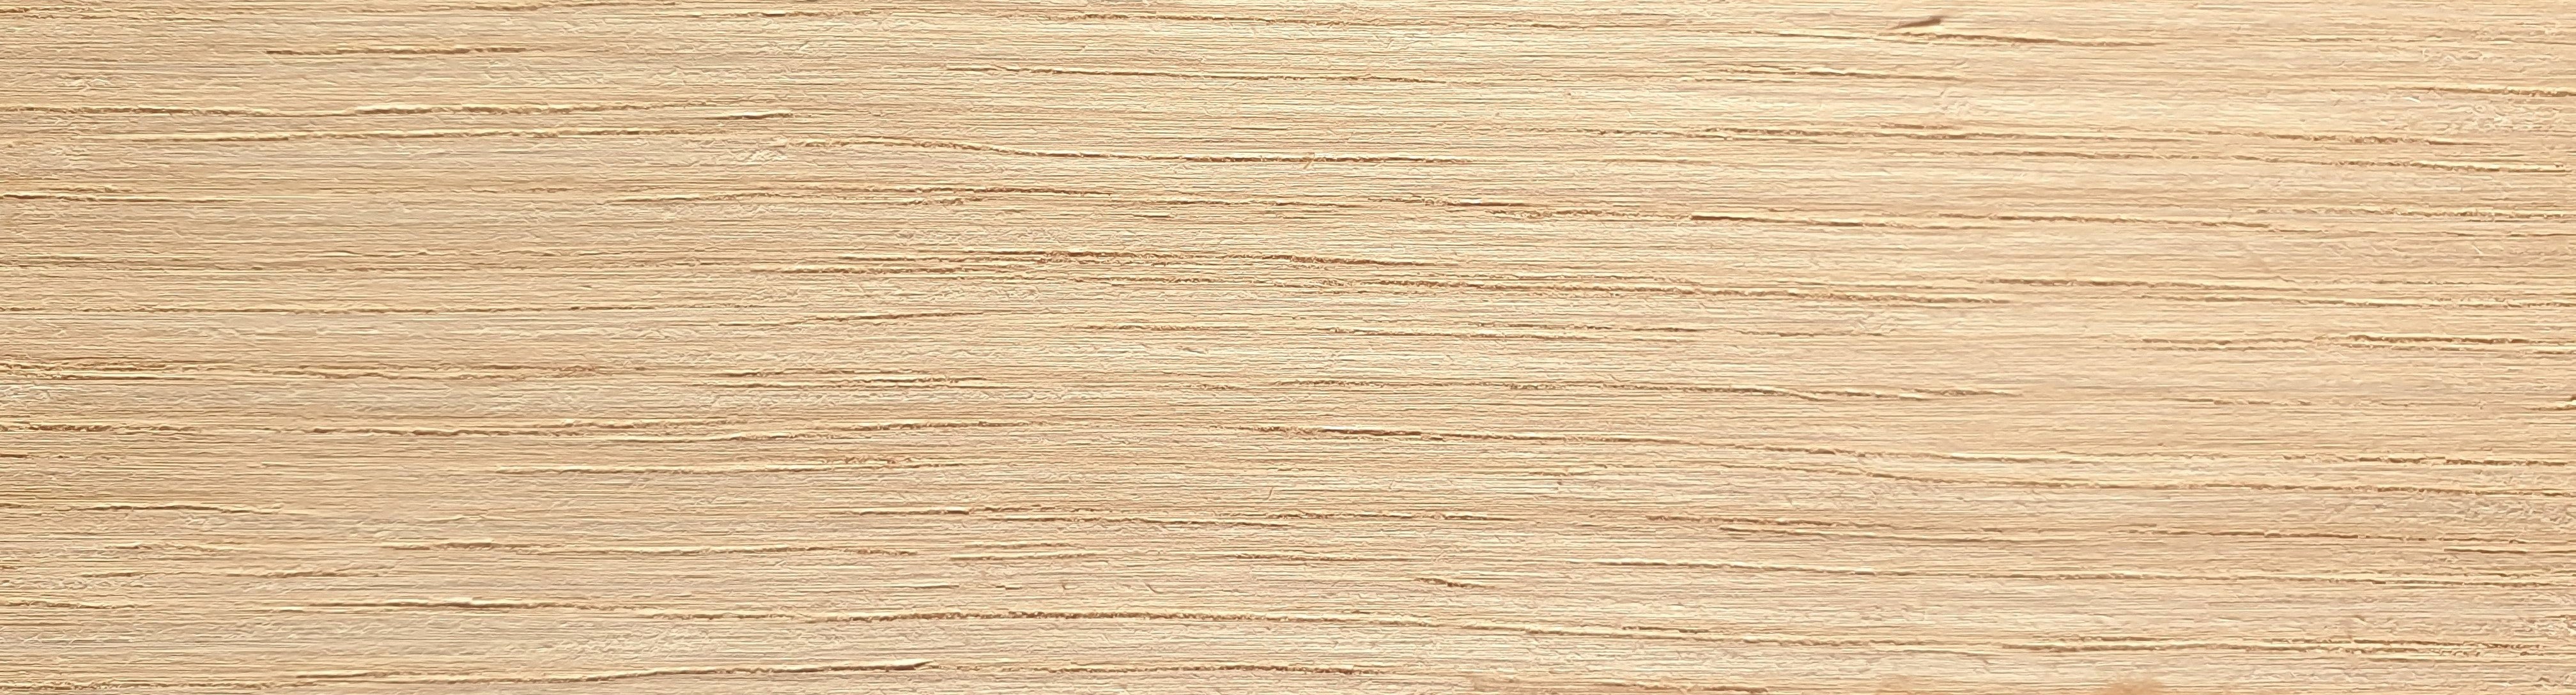 AMERICAN WHITE OAK Pre-glued Iron On Real Wood Edging 22mm Wide